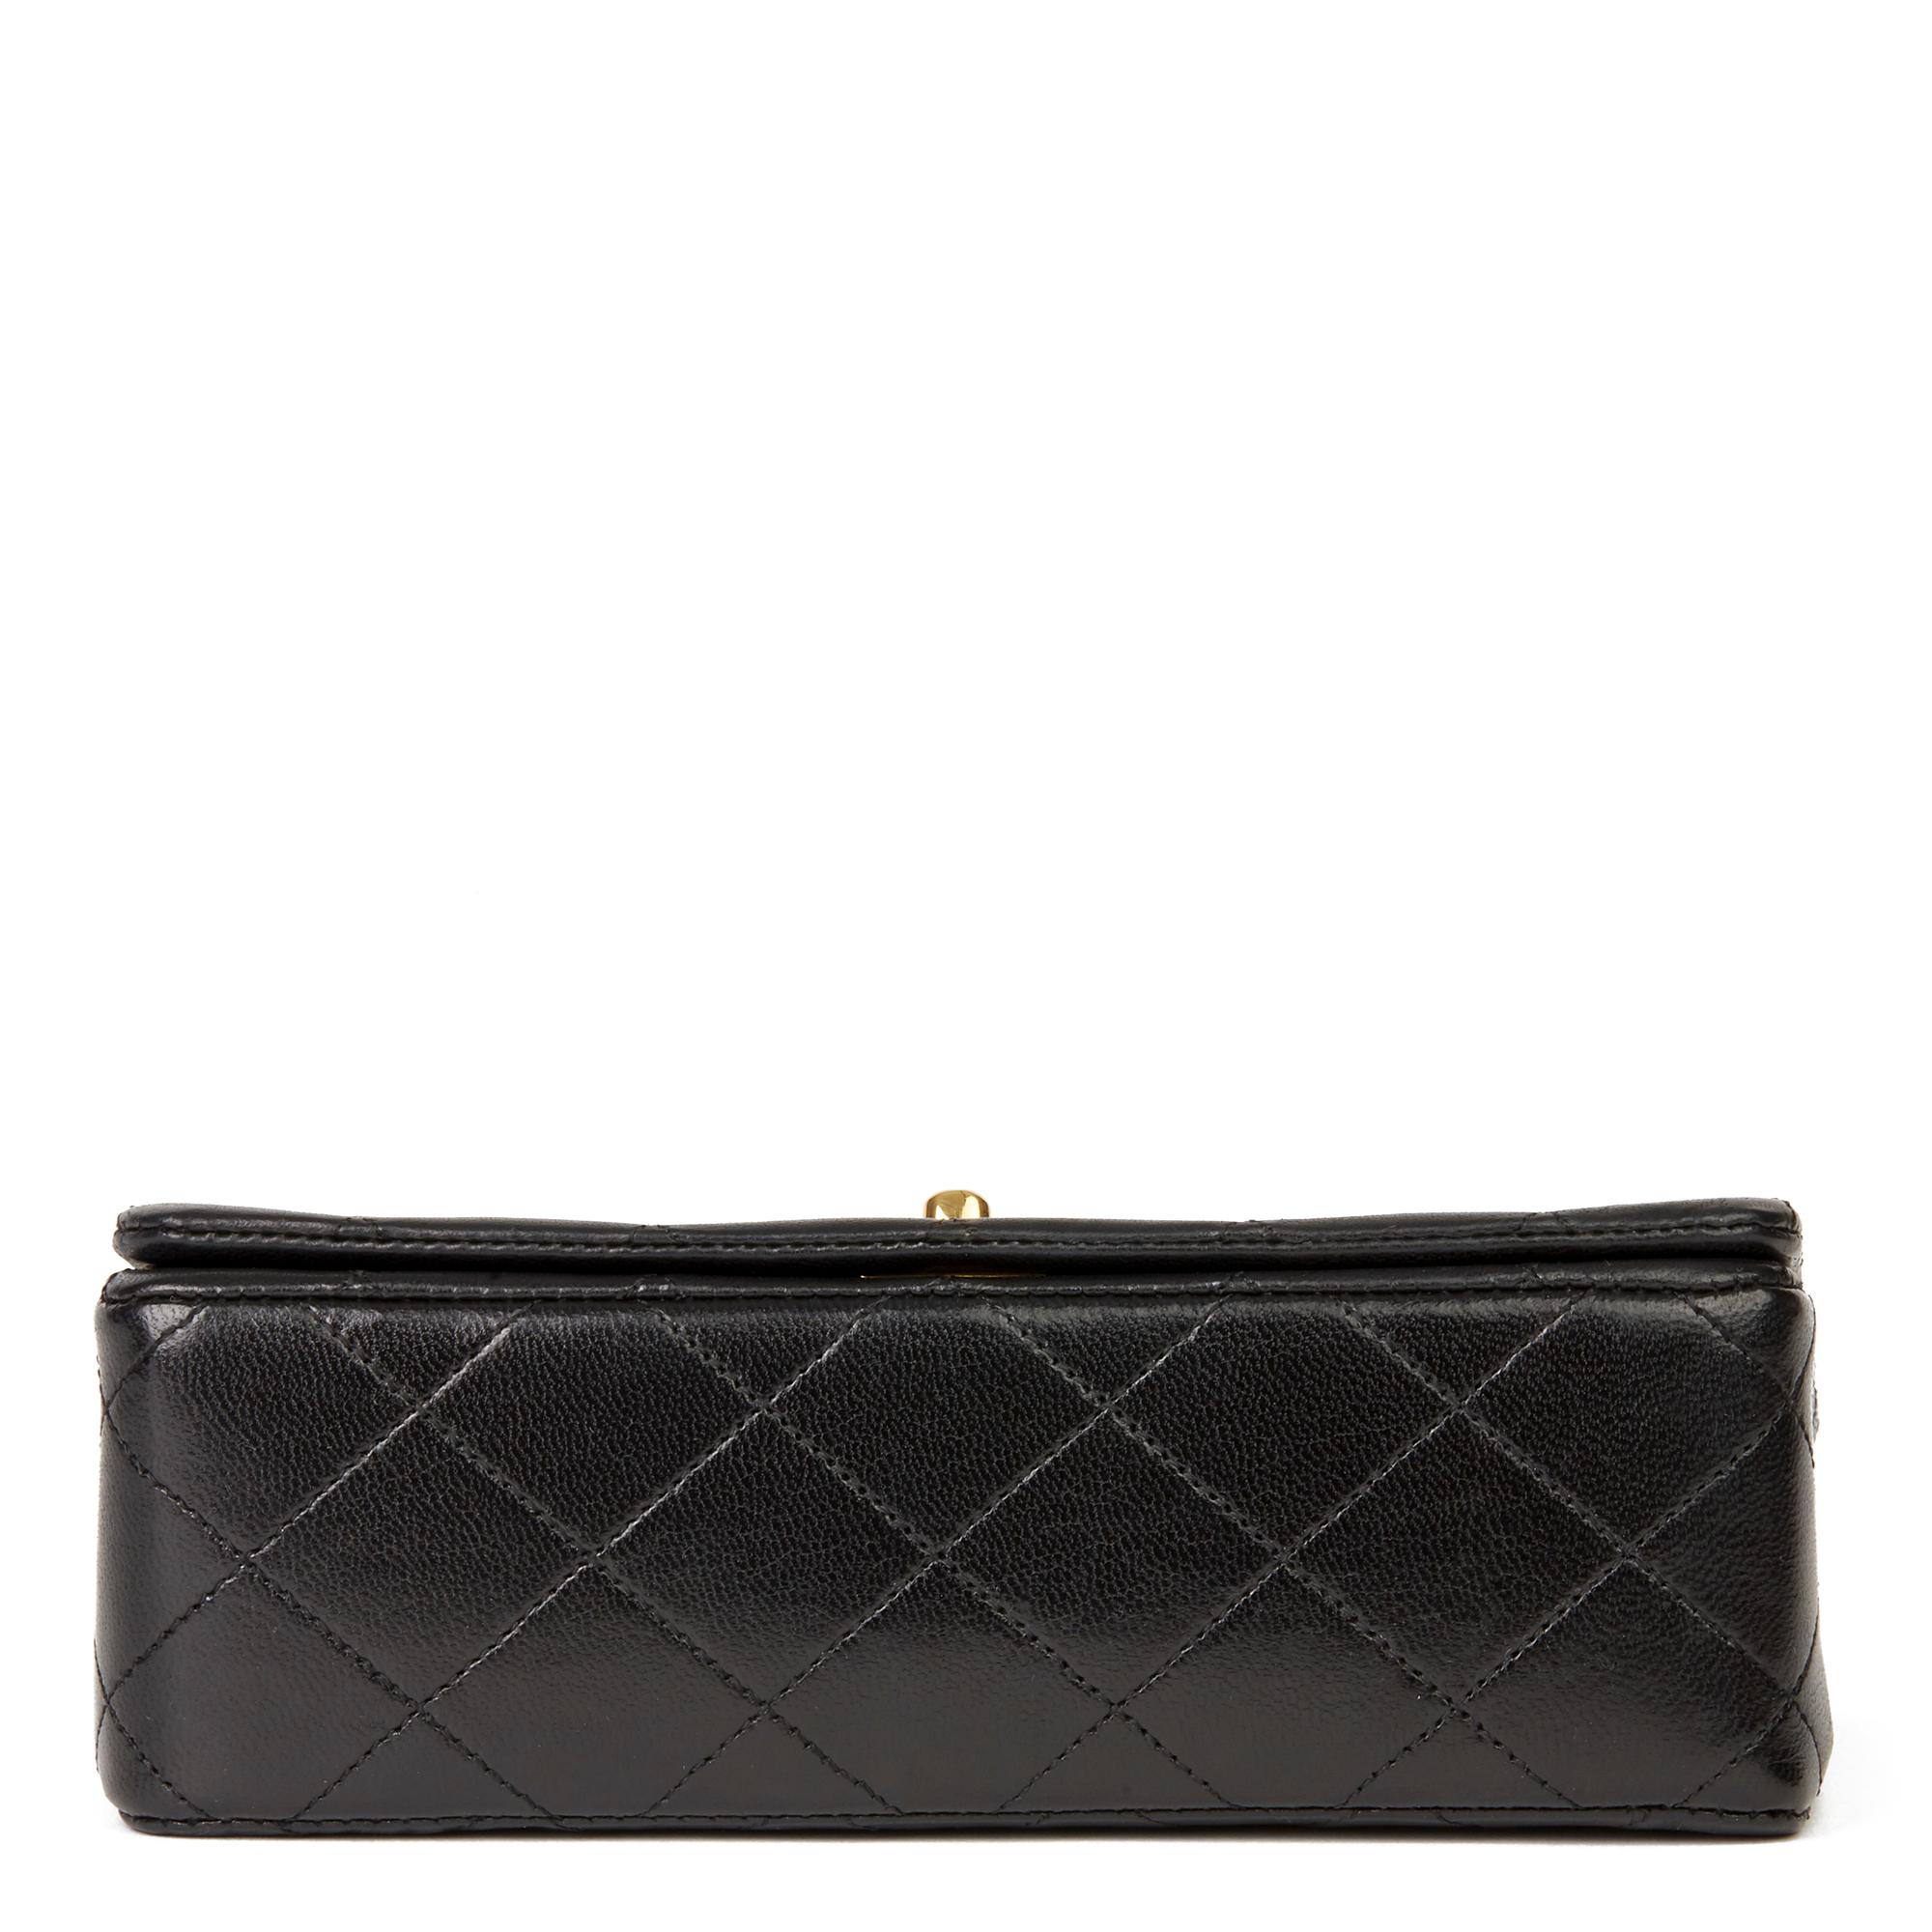 1991 Chanel Black Quilted Lambskin Vintage Mini Flap Bag 1